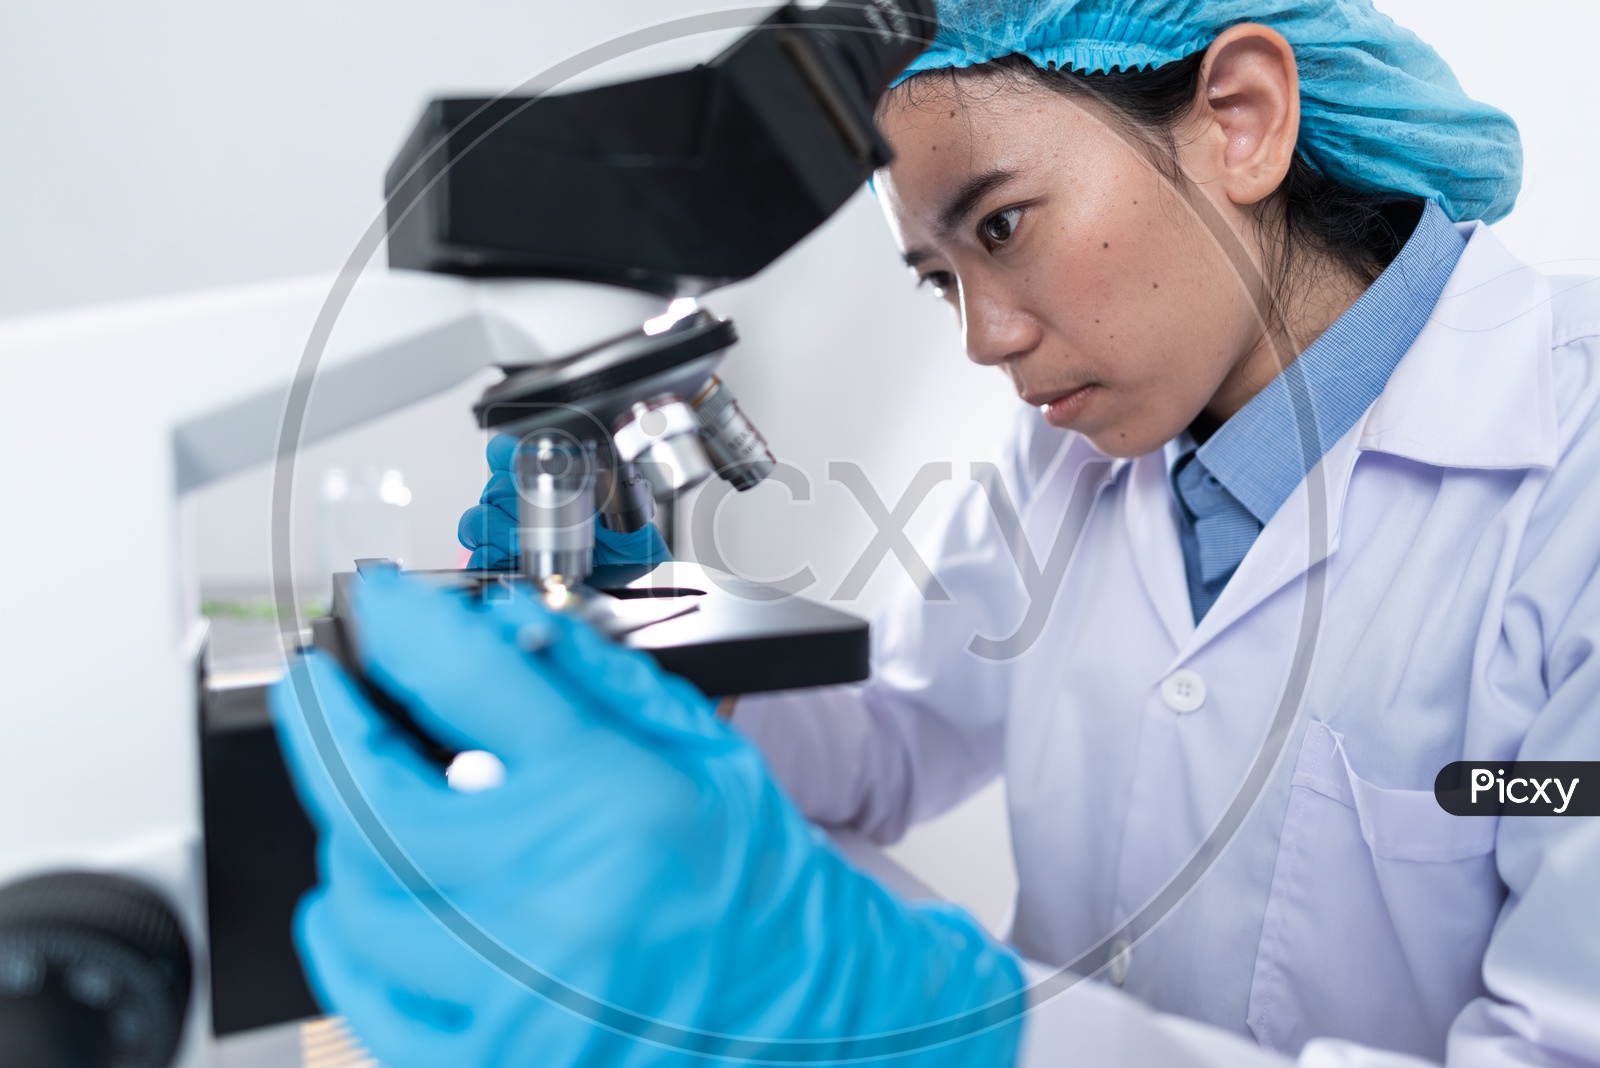 Asian Female Scientist or Medical Student Analyzing Sample through Microscope